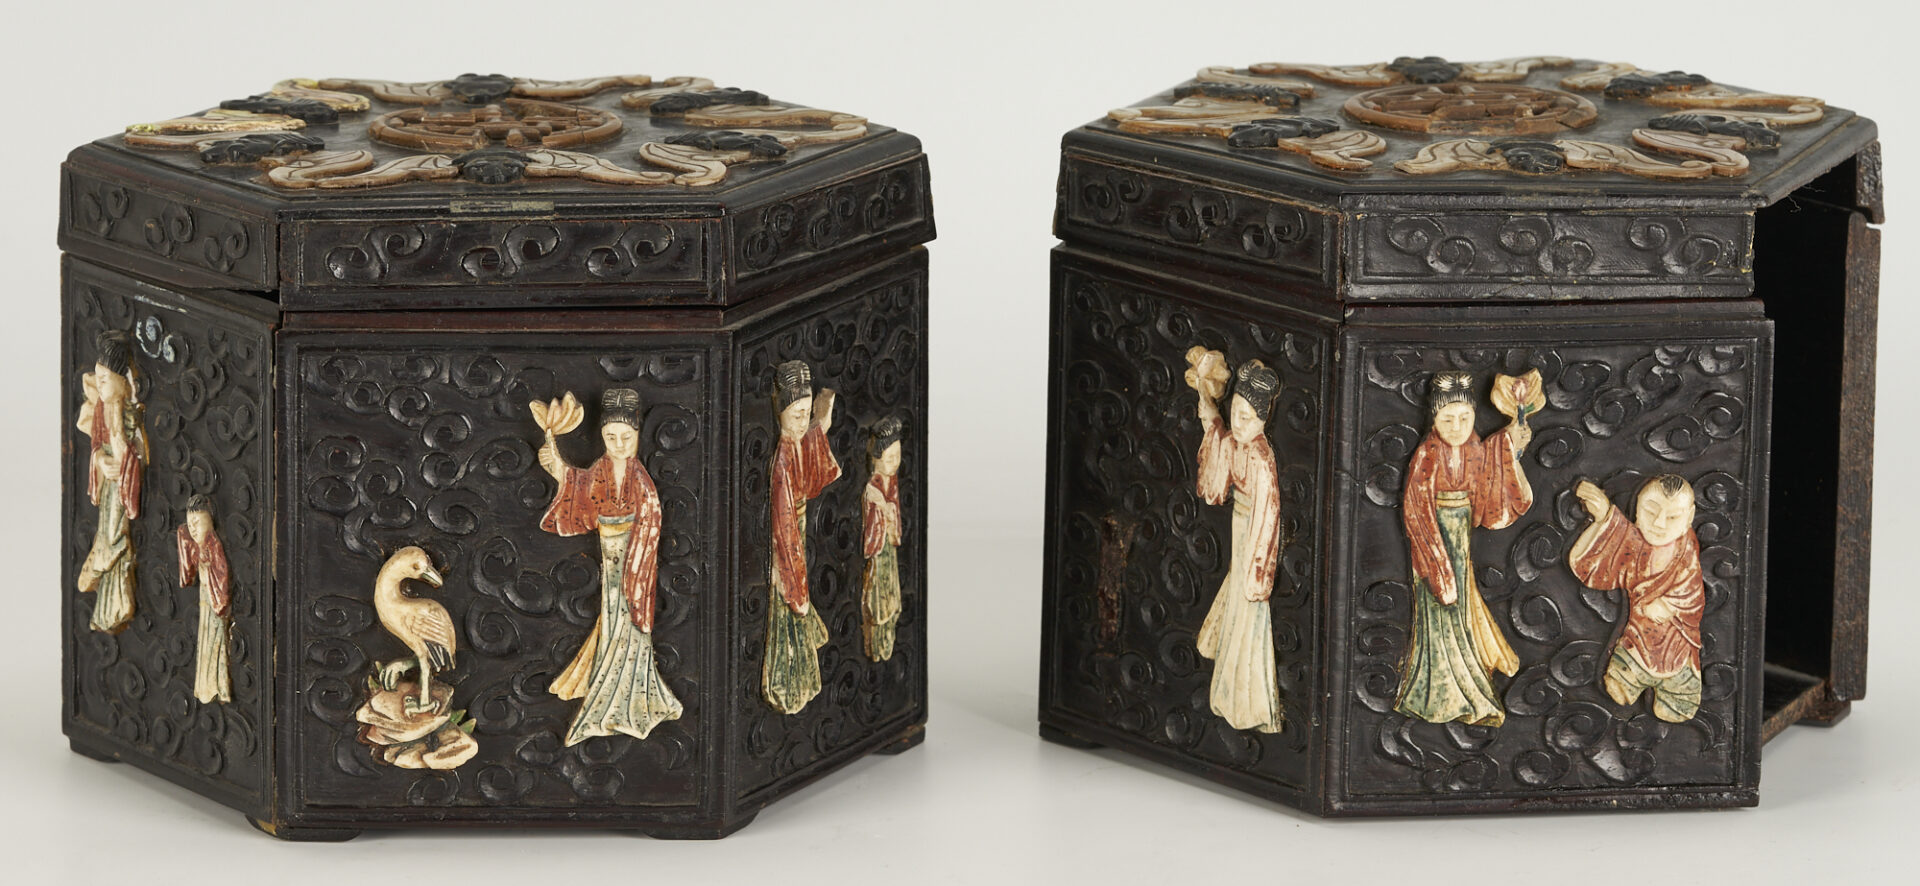 Lot 390: Pair of Chinese Lacquer Boxes & 2 Knives, Chinese & South American